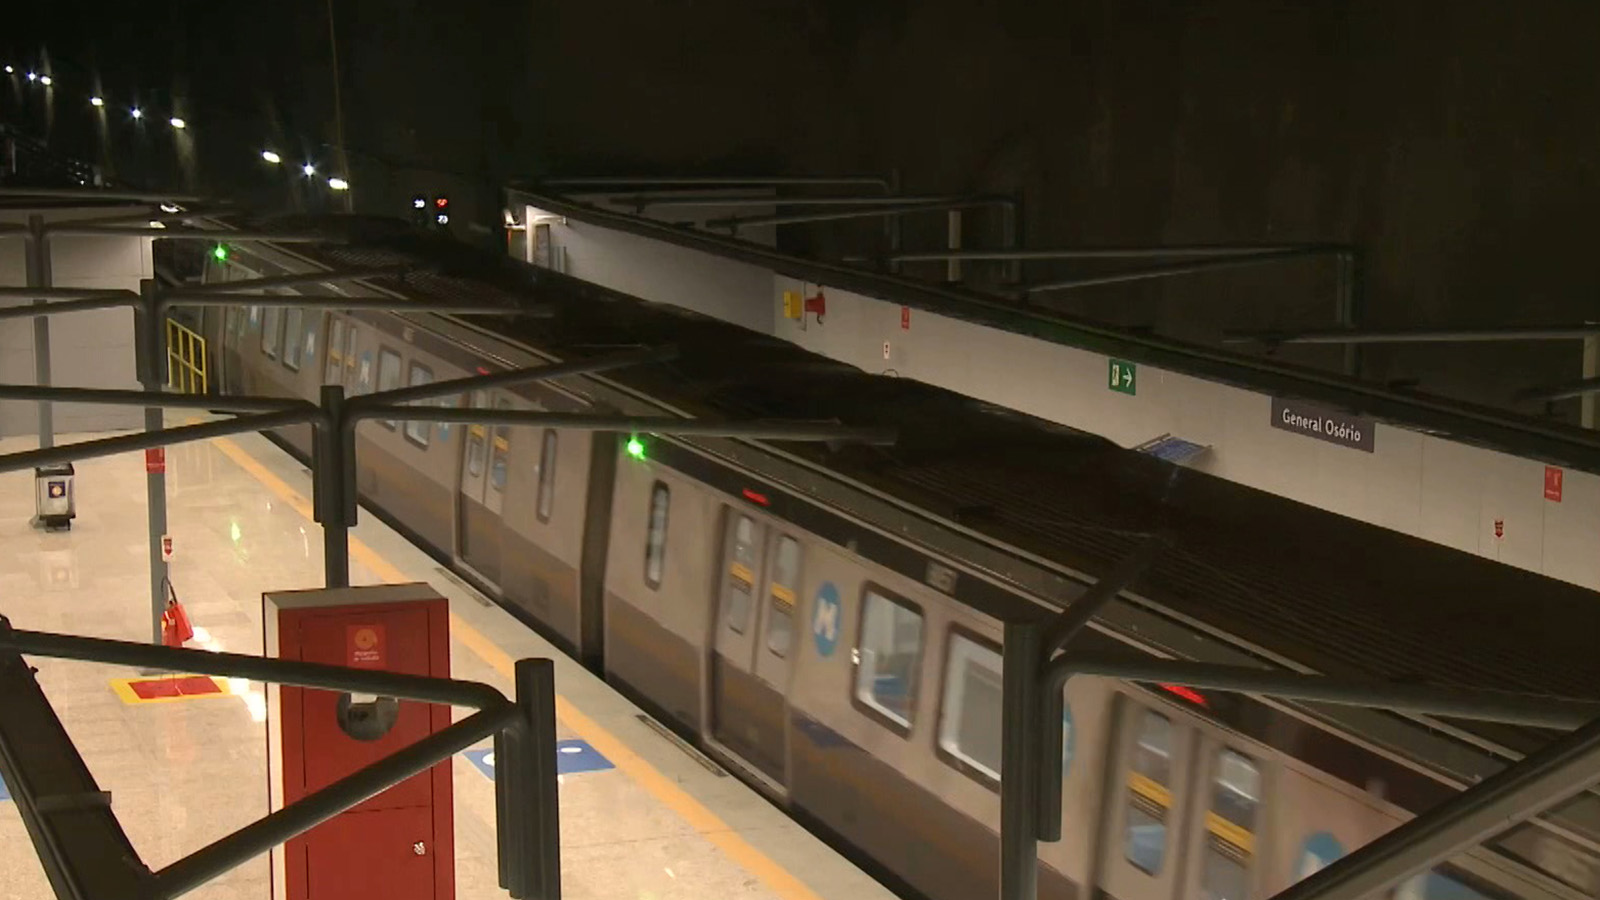 Rio subway line extended for Olympics fans, spectators